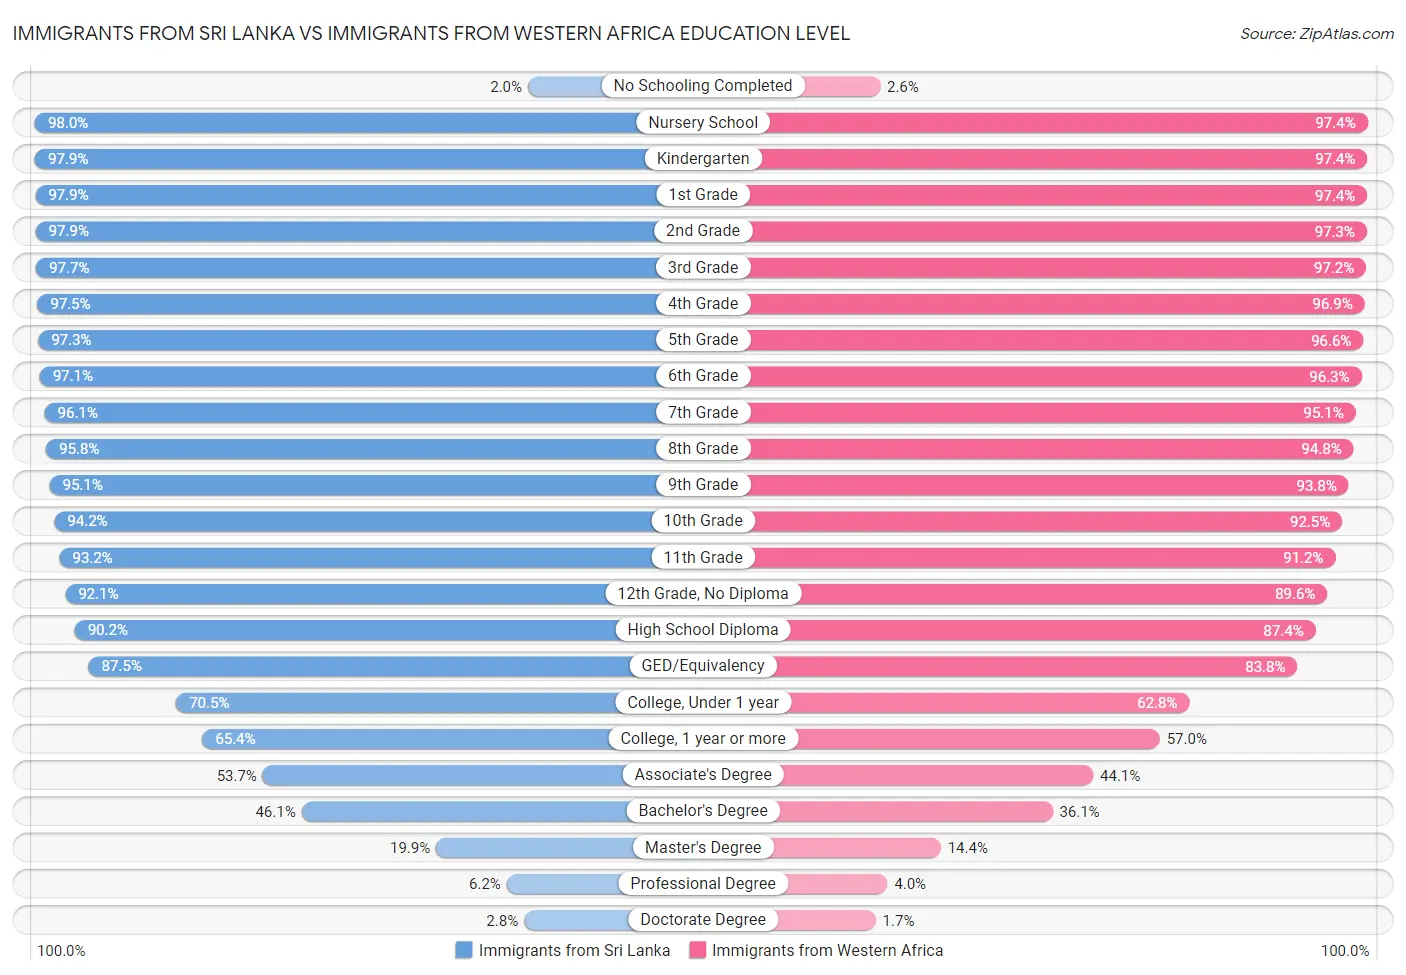 Immigrants from Sri Lanka vs Immigrants from Western Africa Education Level